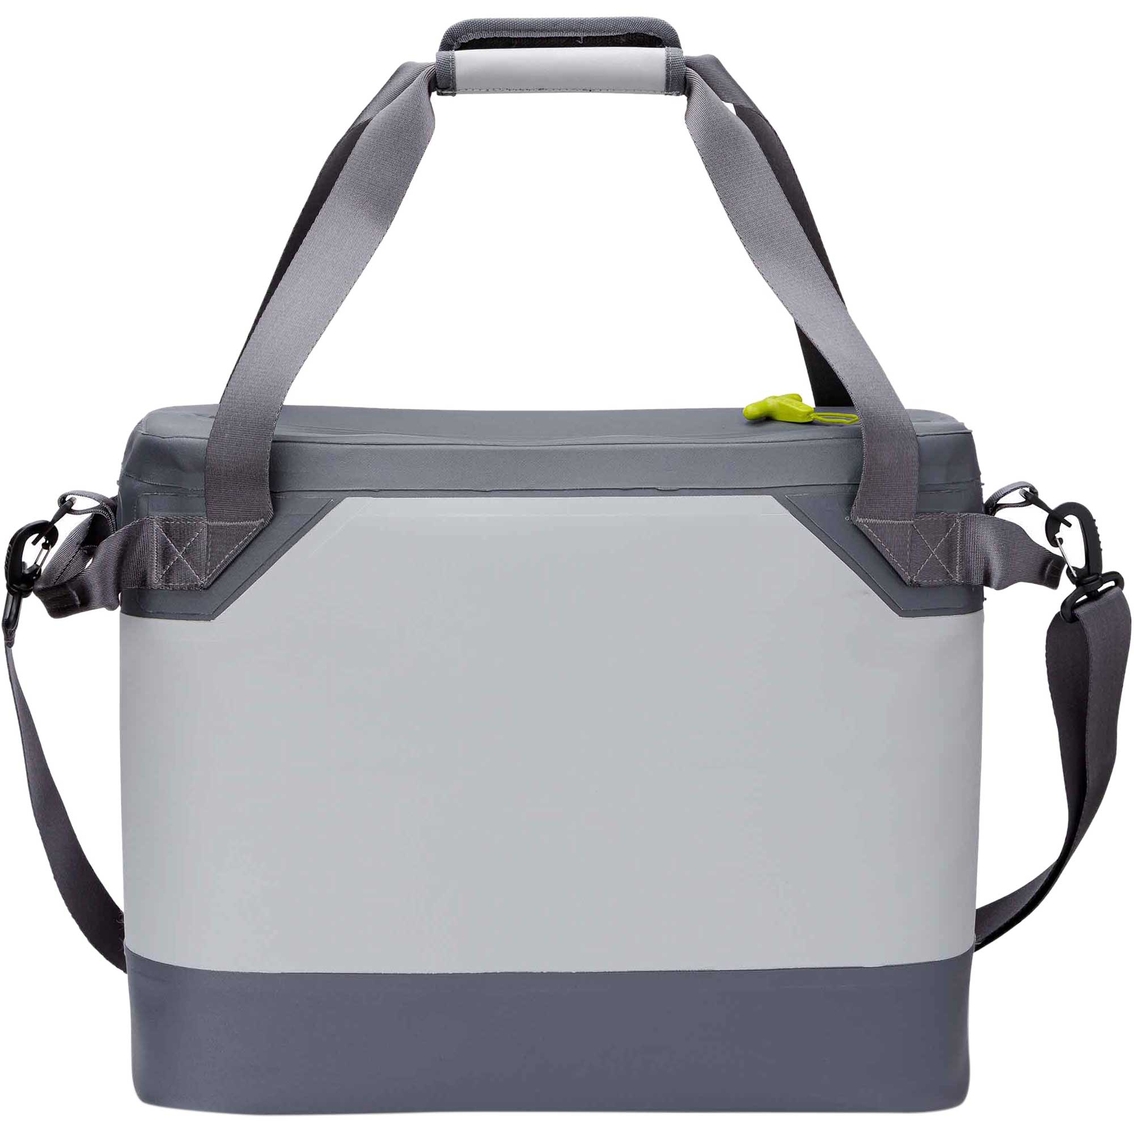 Core Equipment 20L Performance Soft Cooler Tote - Image 6 of 10